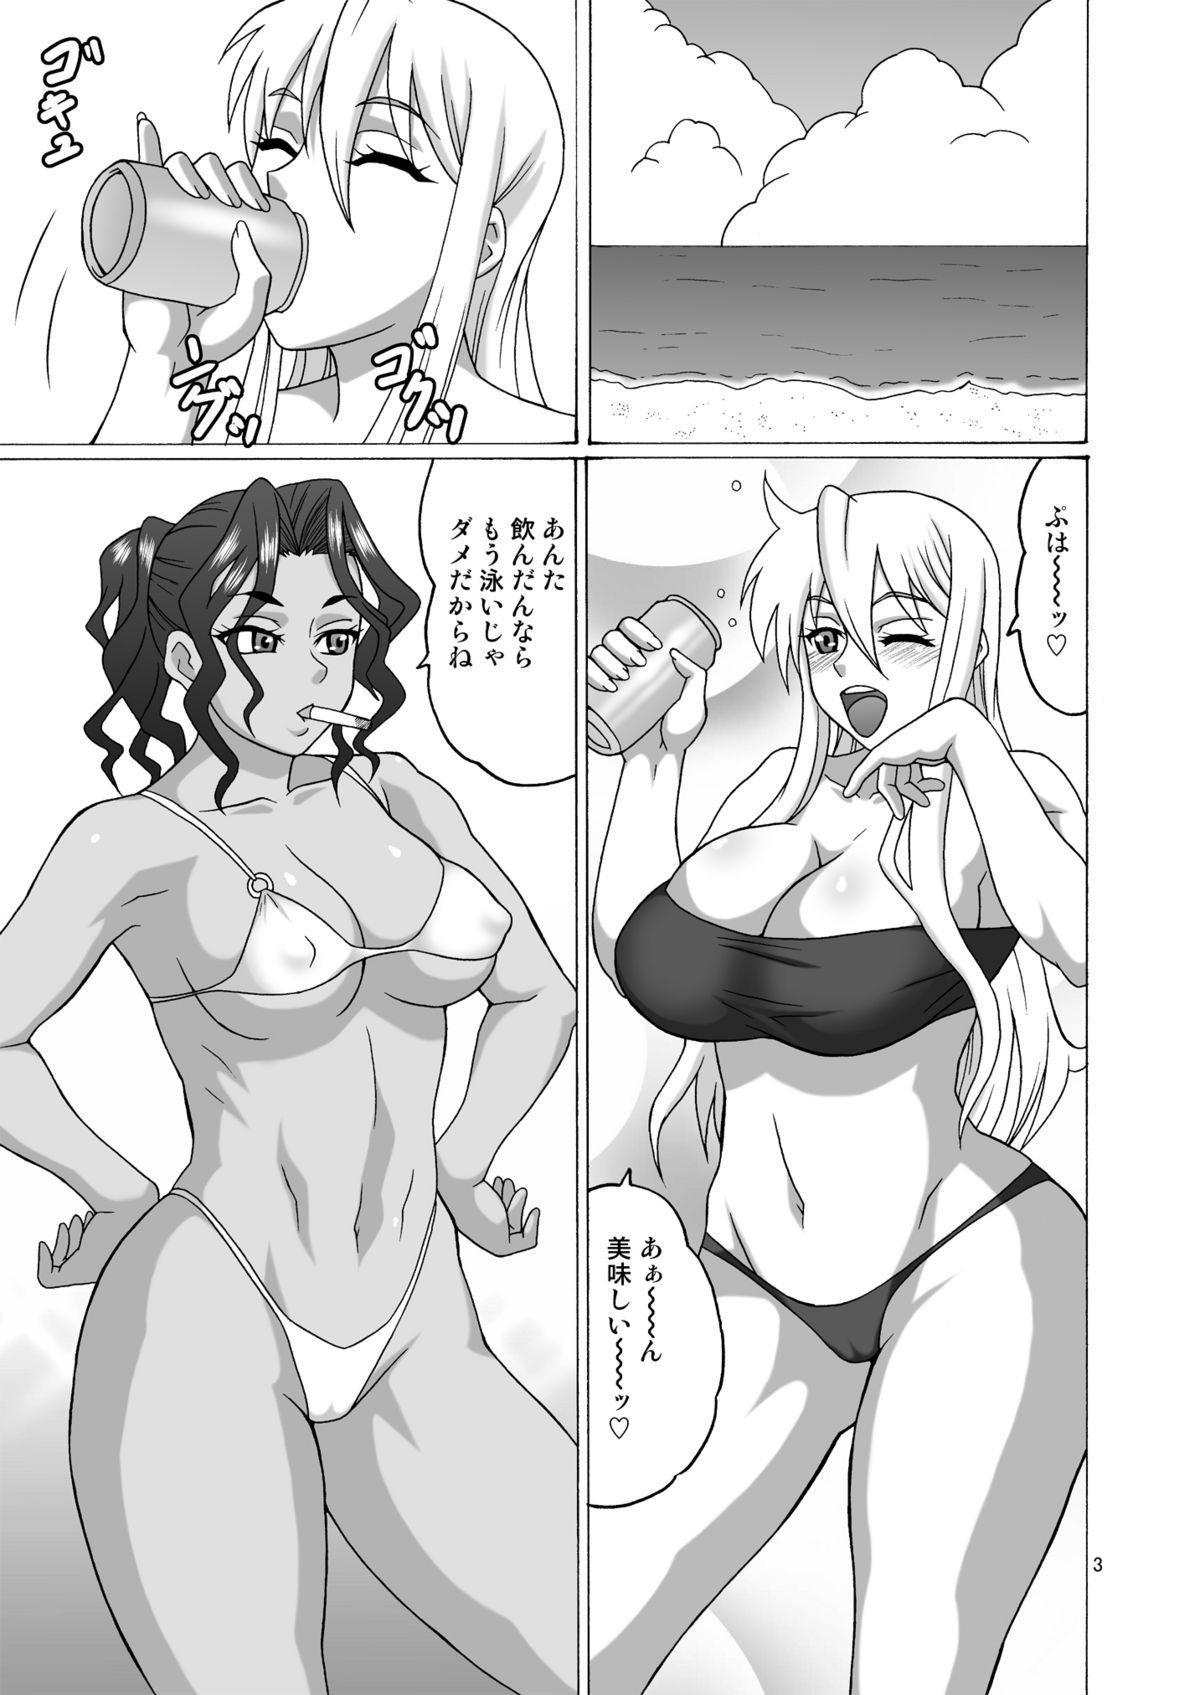 Cojiendo Beach no BITCH - Highschool of the dead Anal Licking - Page 2